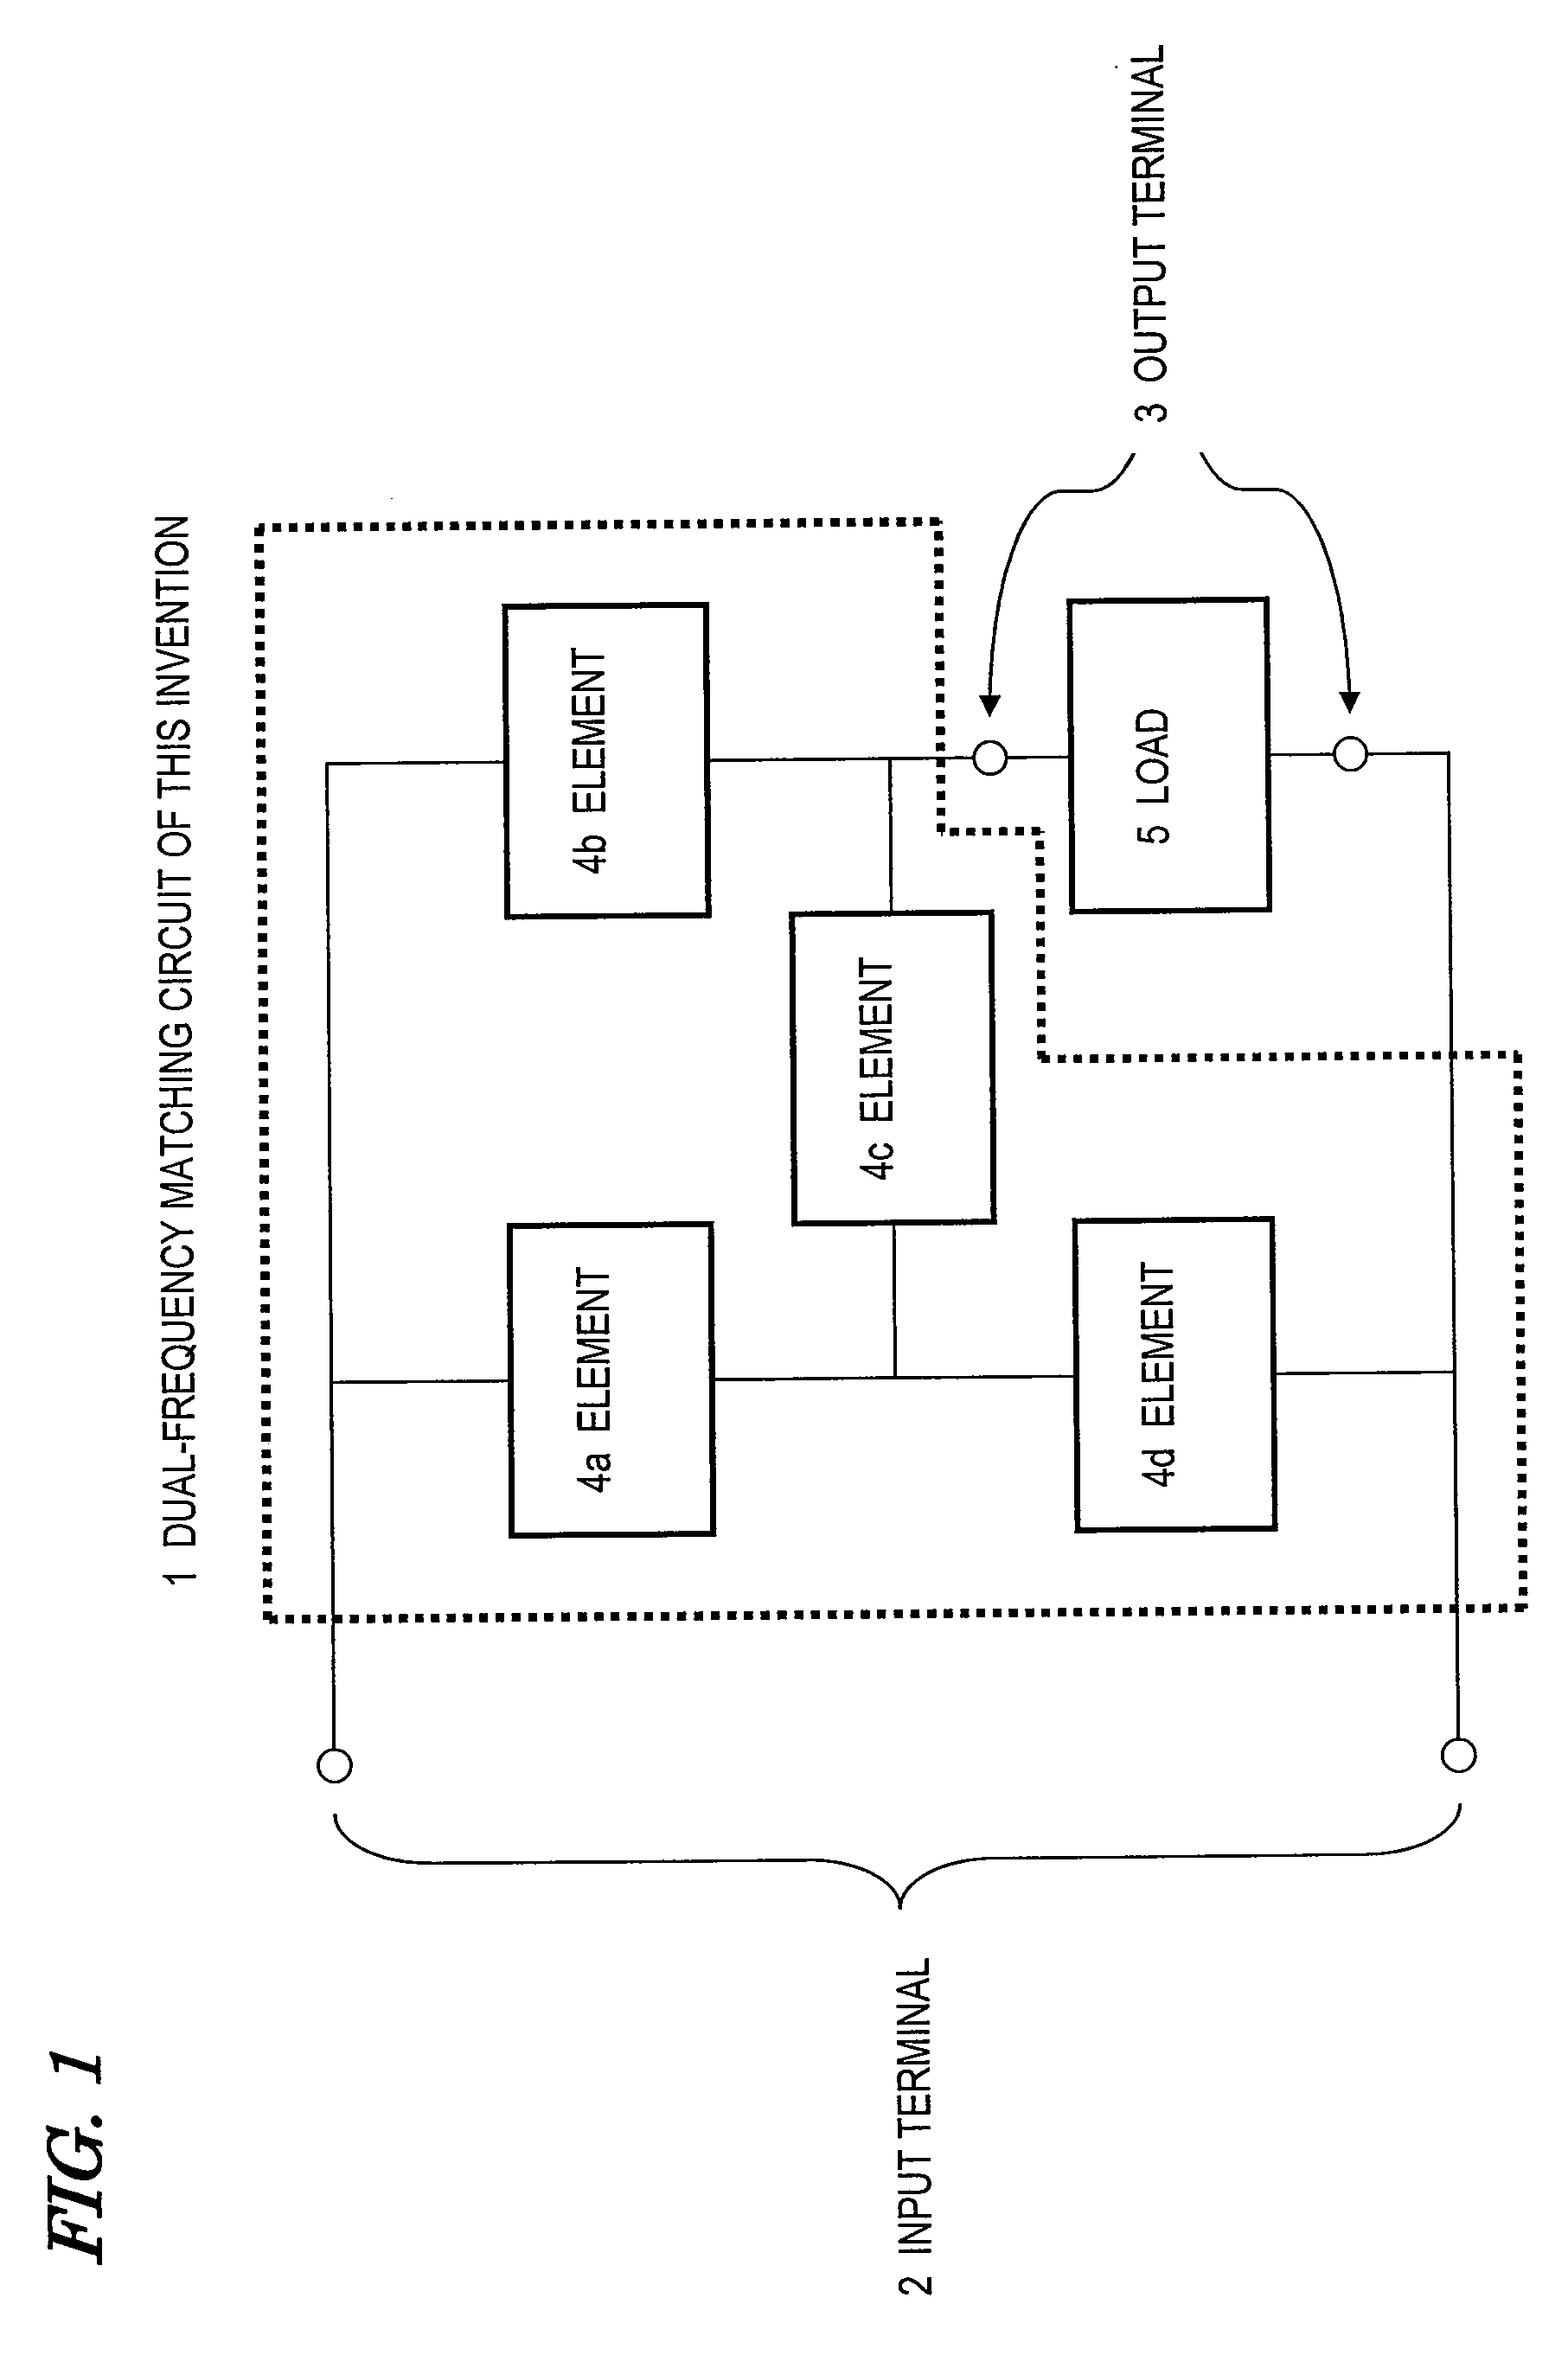 Dual-frequency matching circuit